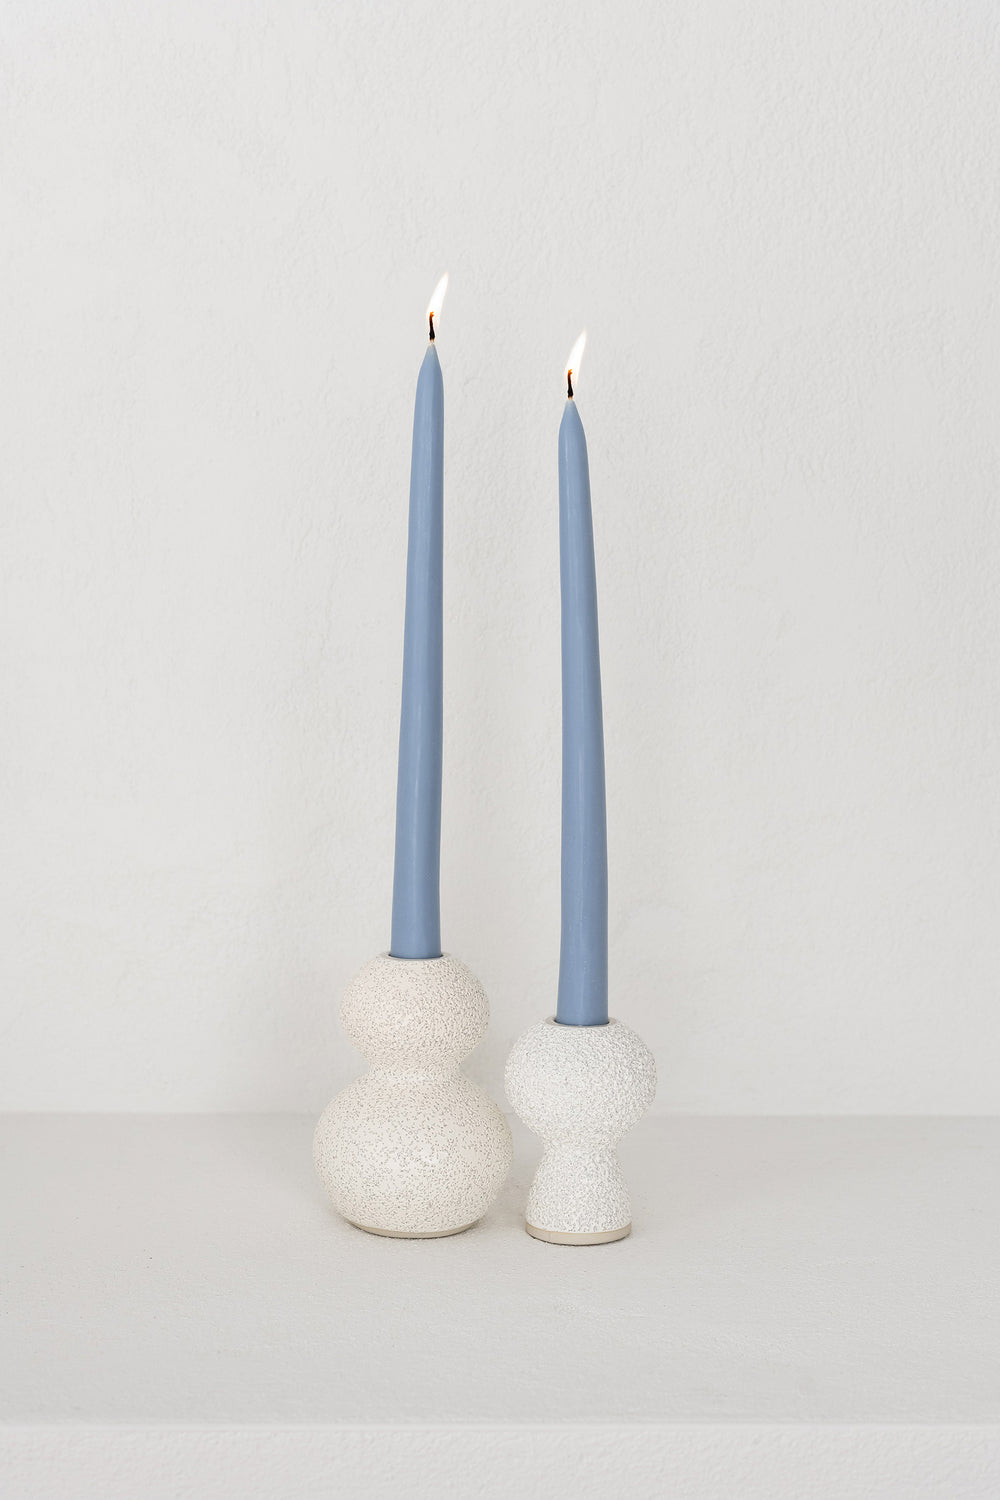 Tapered Candles - Dusty Blue